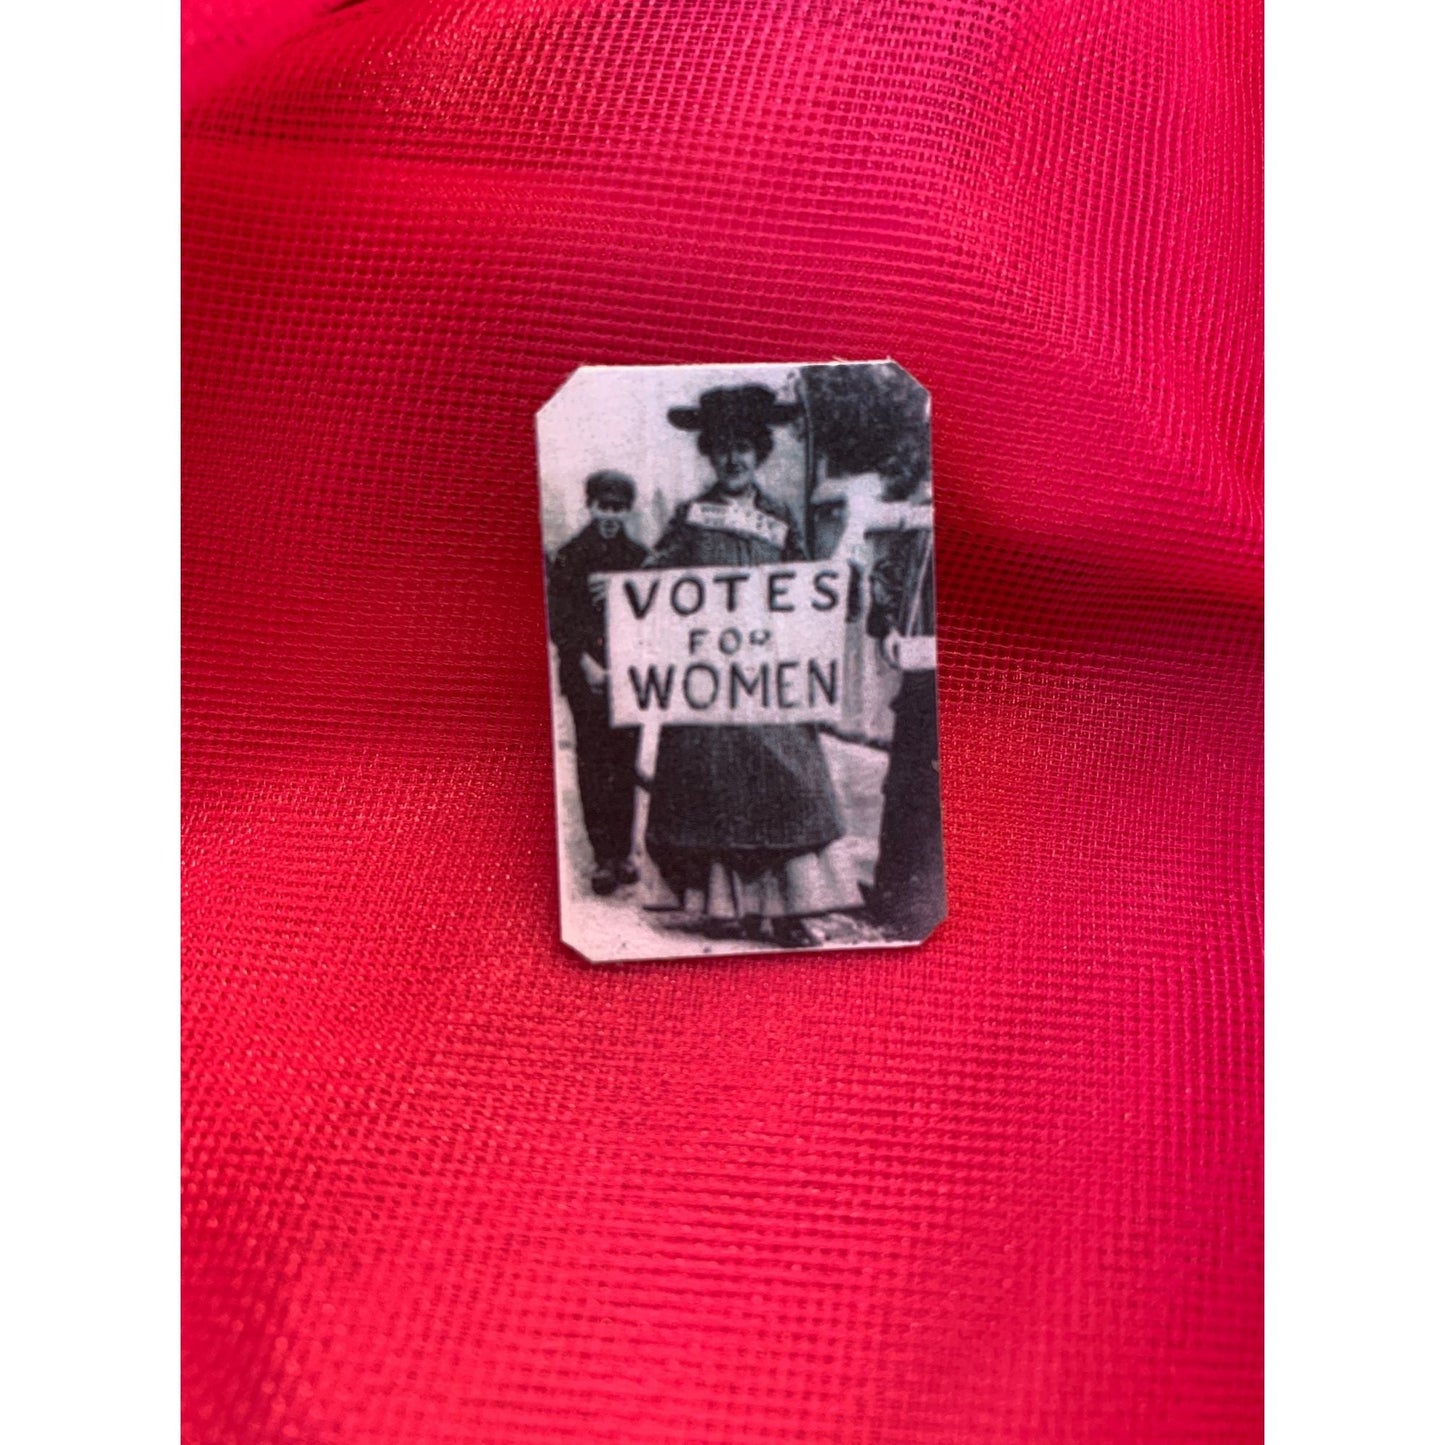 Women's Suffrage "Lady with Hat" Votes For Women Handmade Feminist Metal Lapel Pin